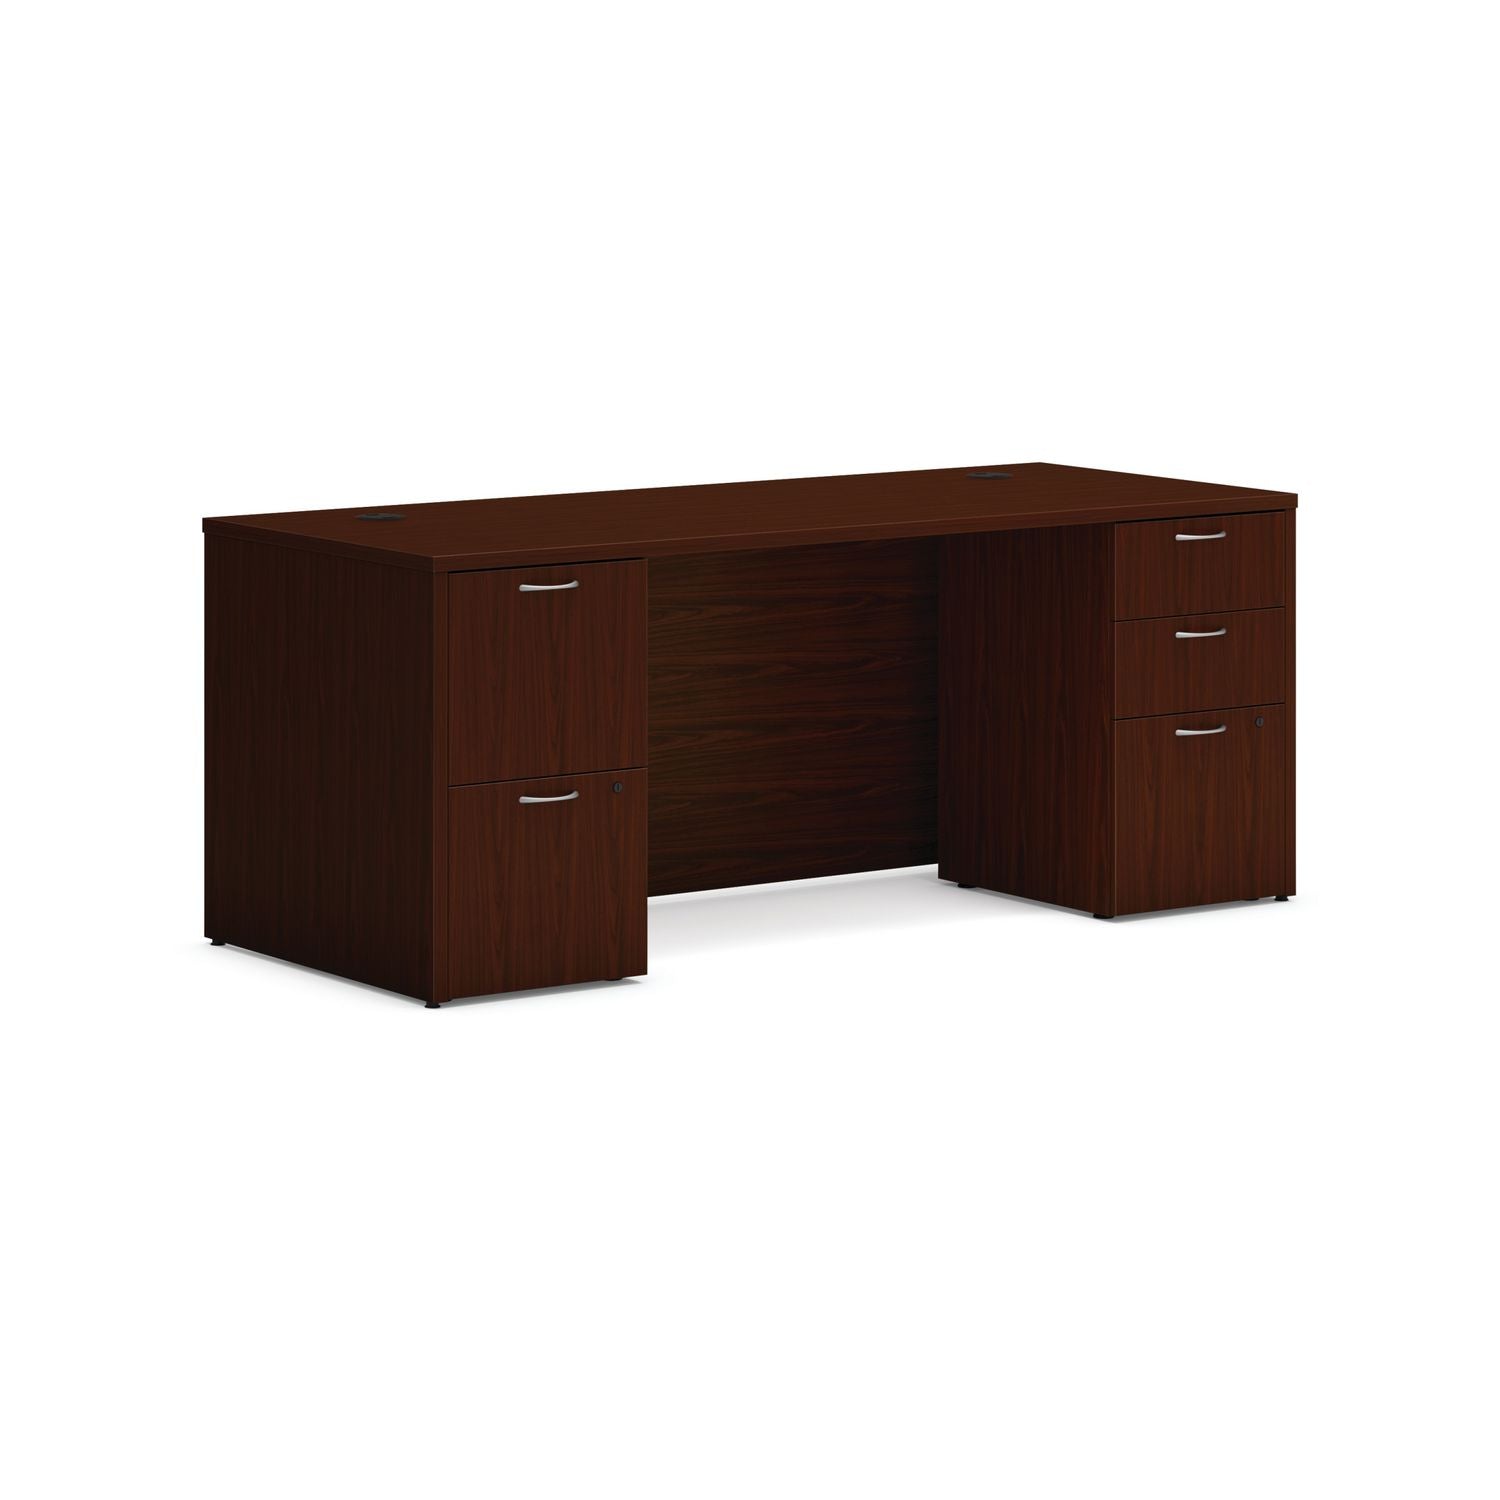 mod-double-pedestal-desk-bundle-72-x-30-x-29-traditional-mahogany-ships-in-7-10-business-days_honmod006 - 1